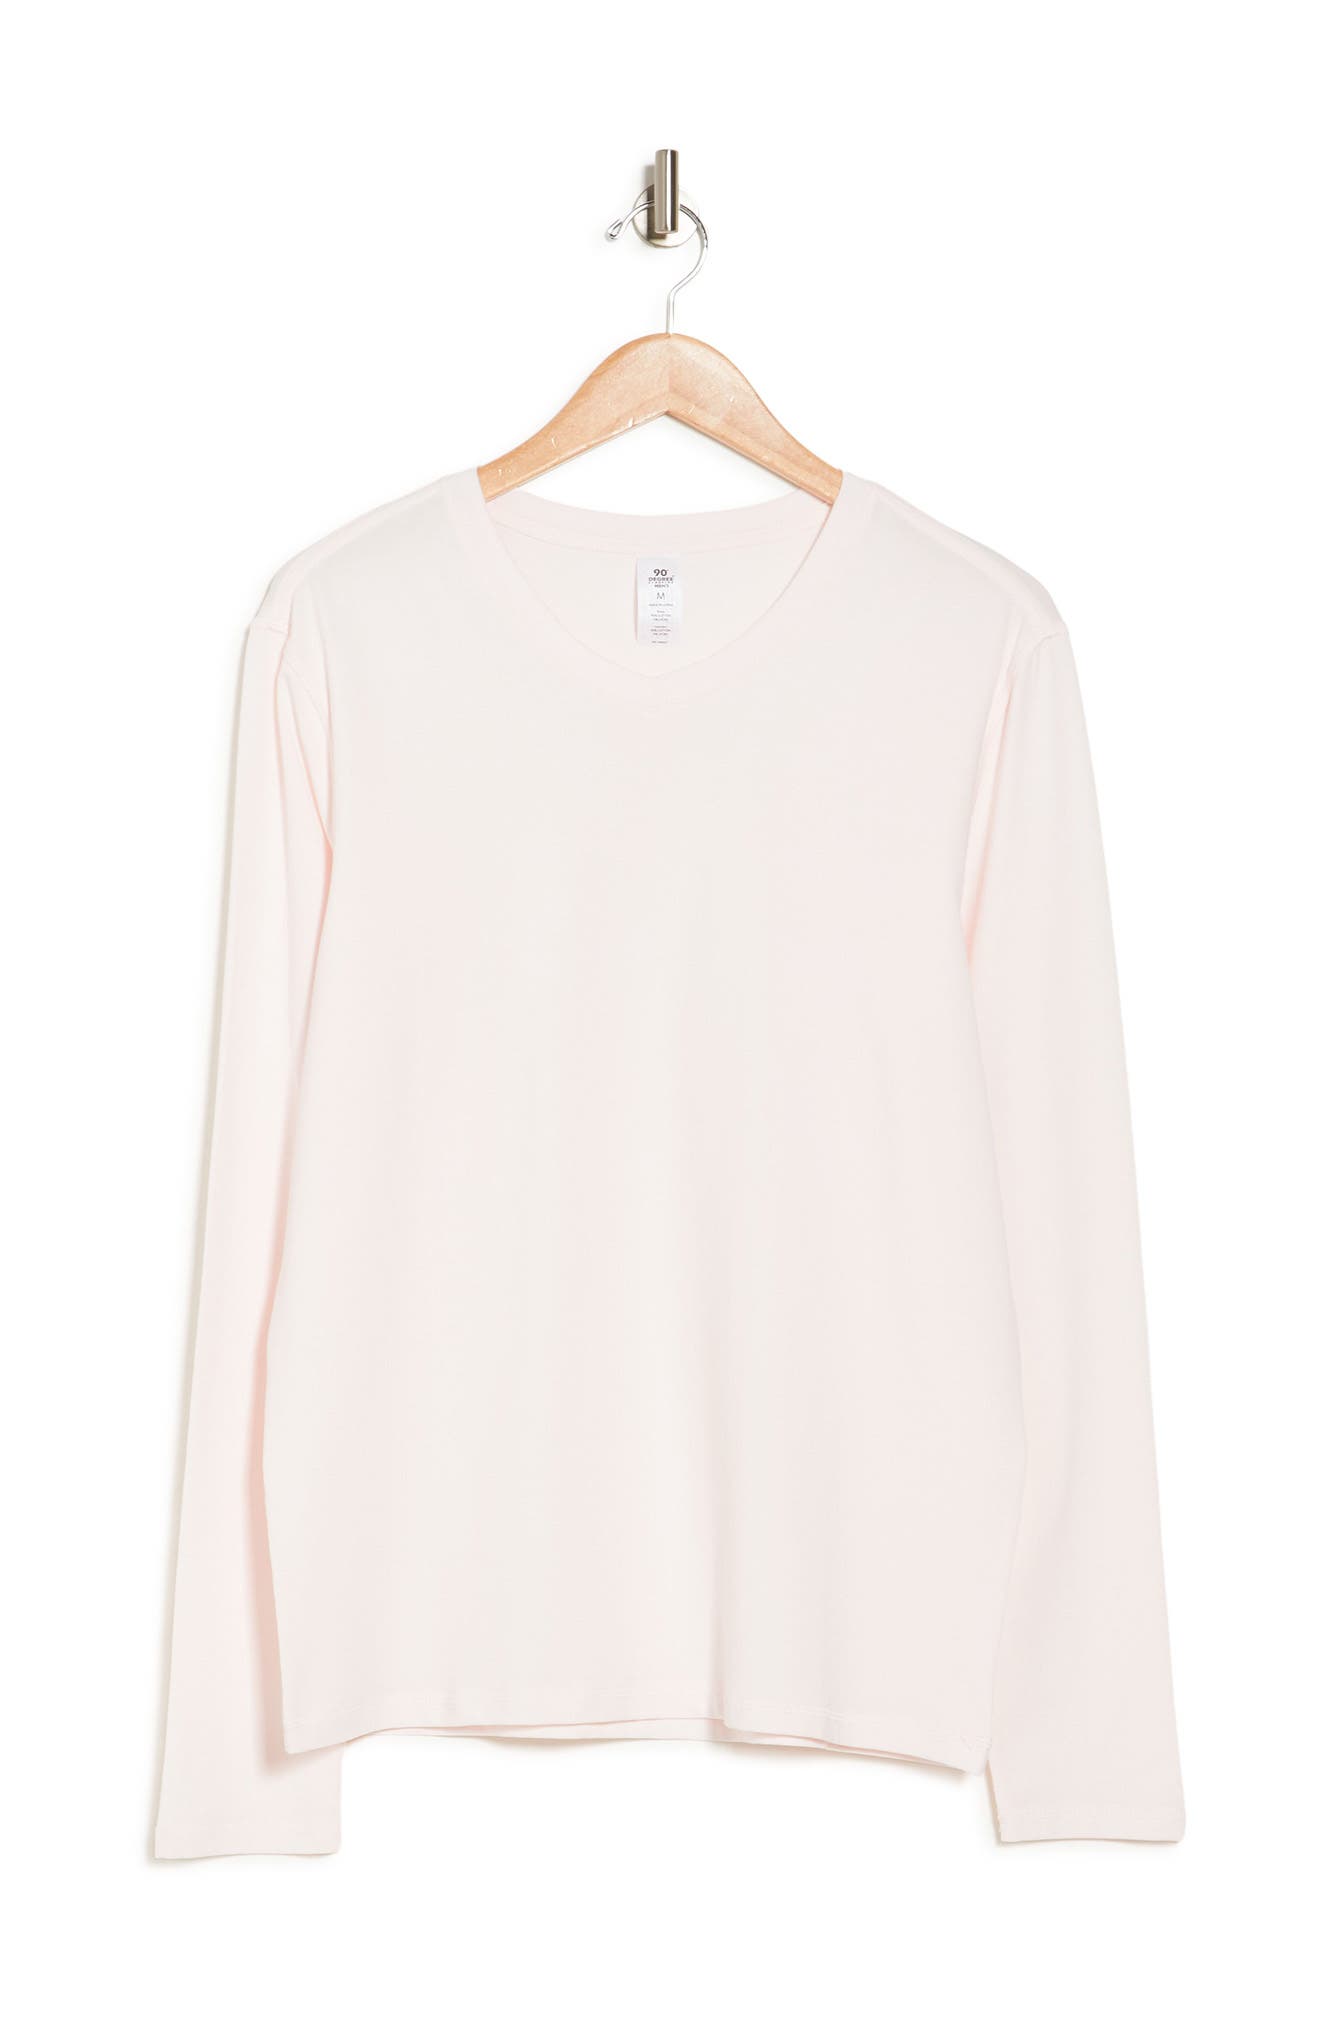 90 Degree By Reflex V-neck Long Sleeve T-shirt In Lt.pink